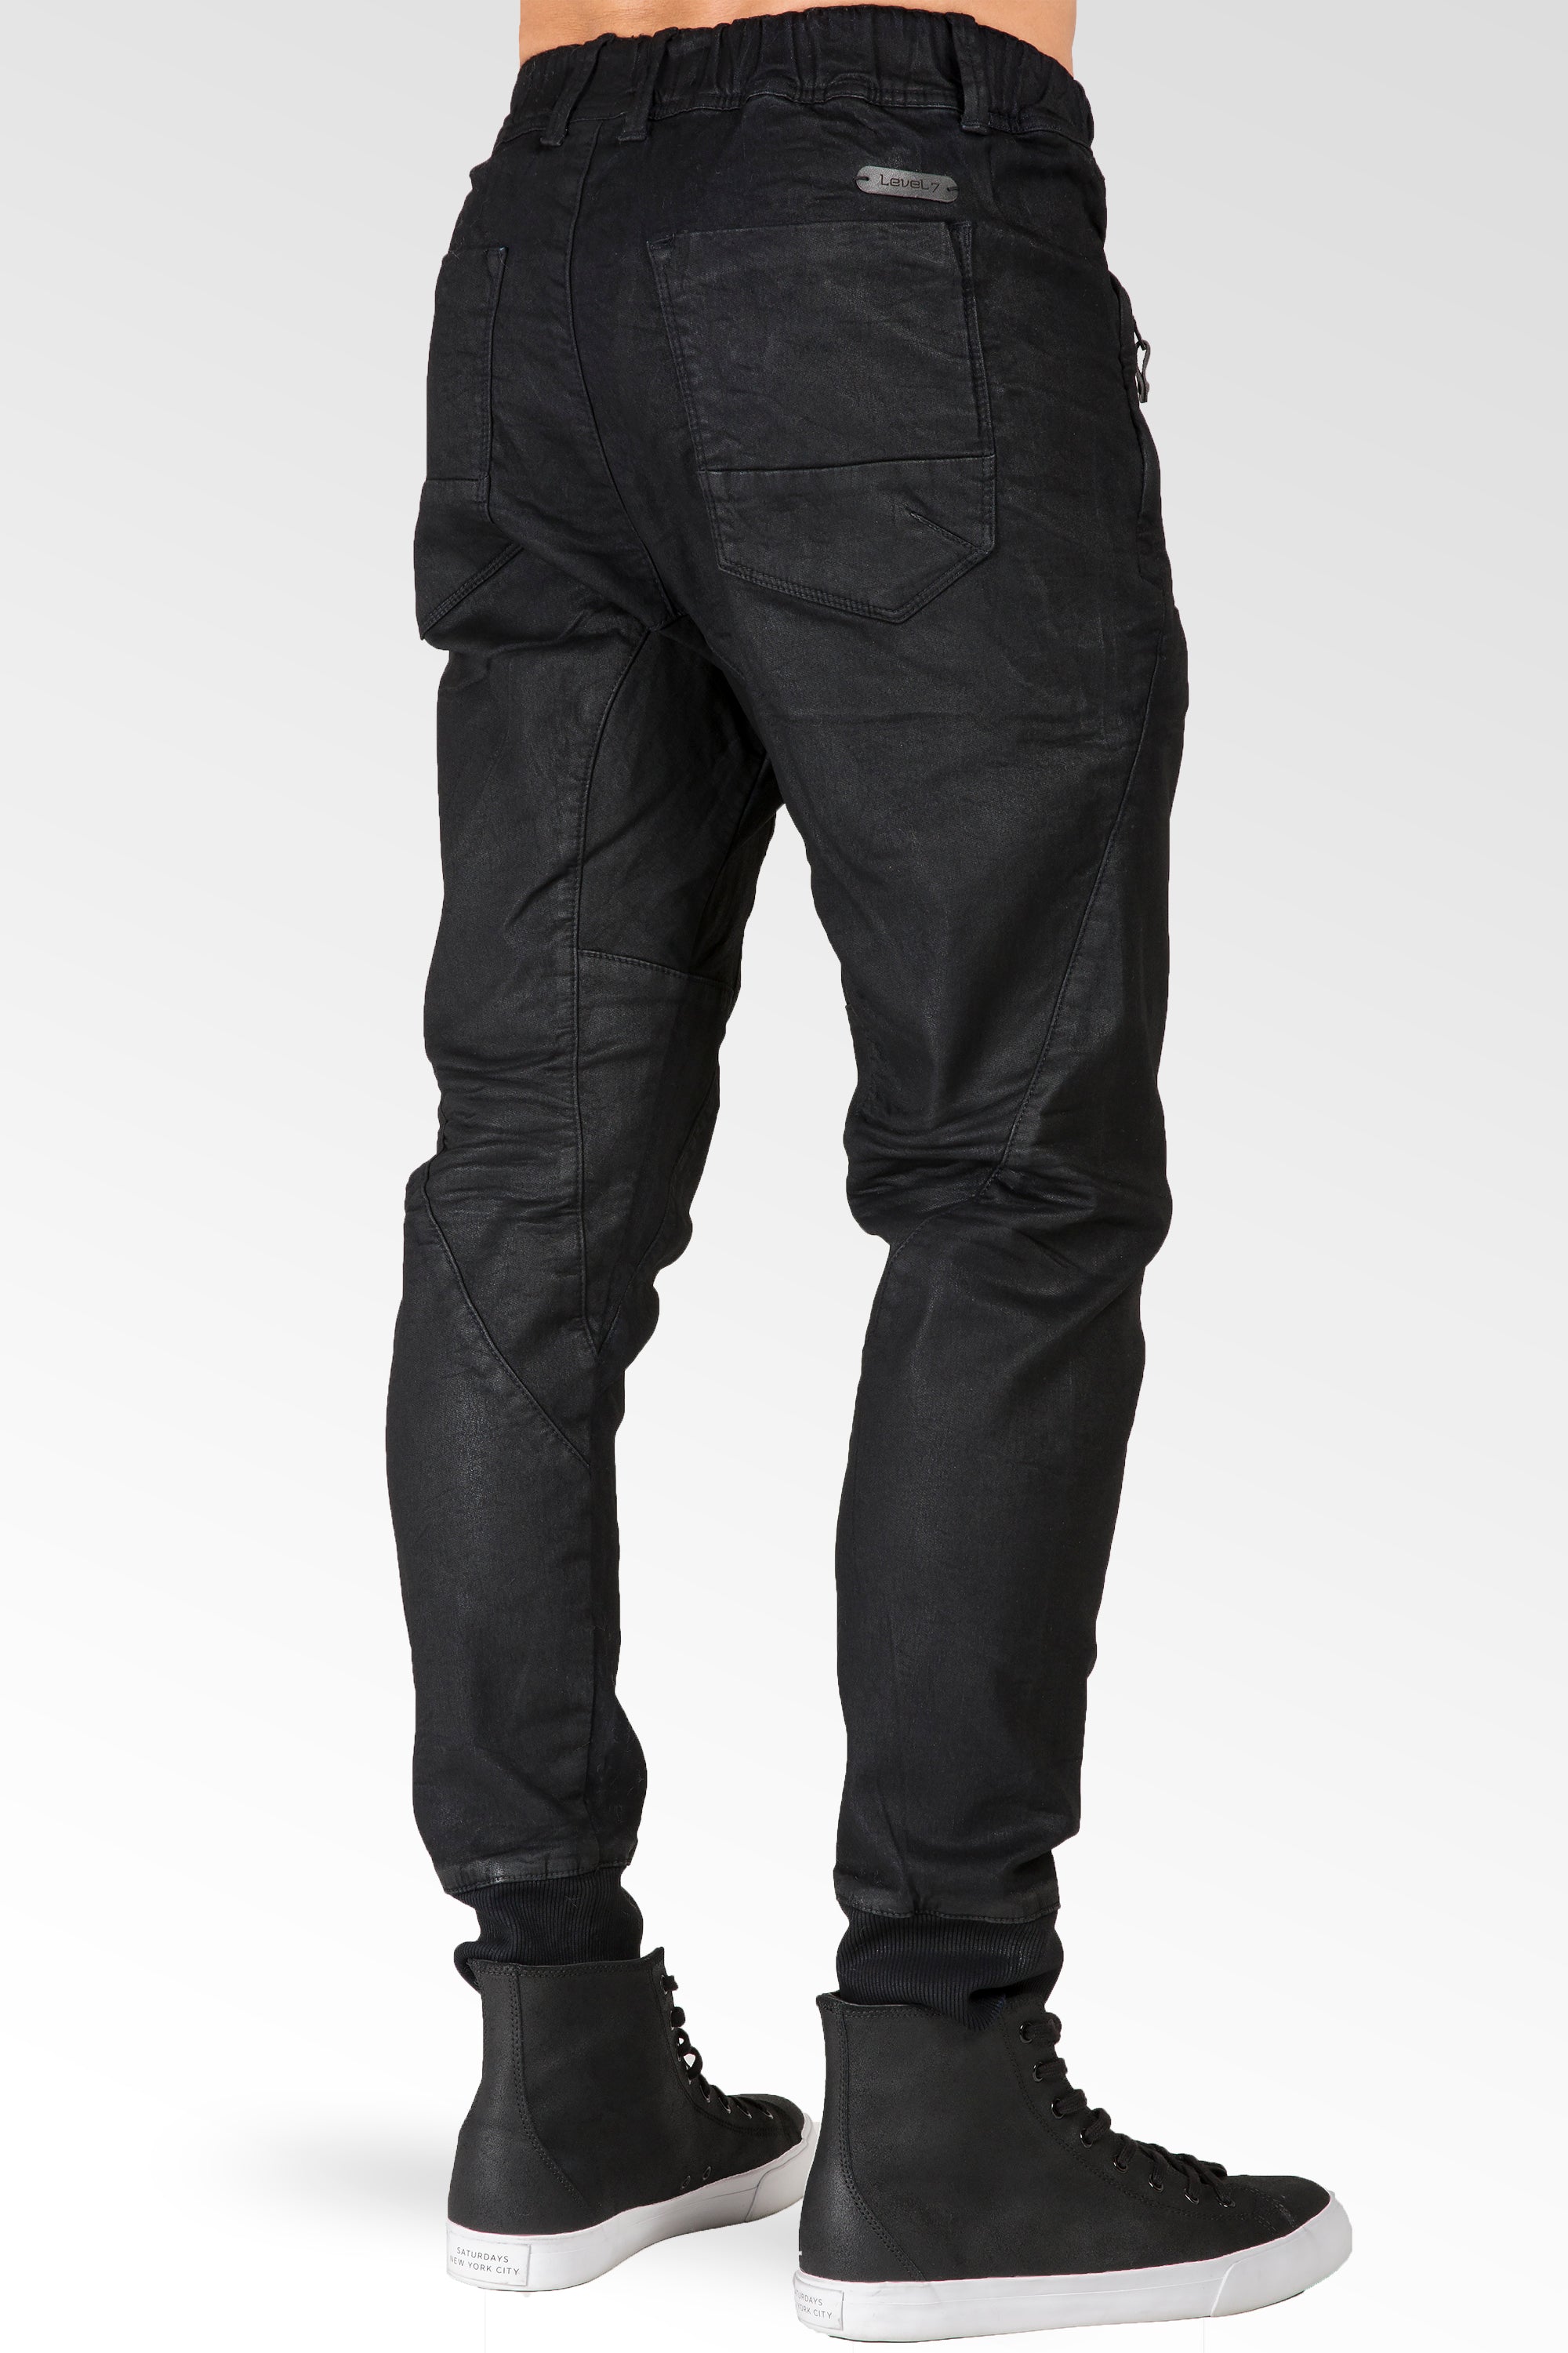 Buy 3D Cargo Utility Jogger Men's Jeans & Pants from Buyers Picks